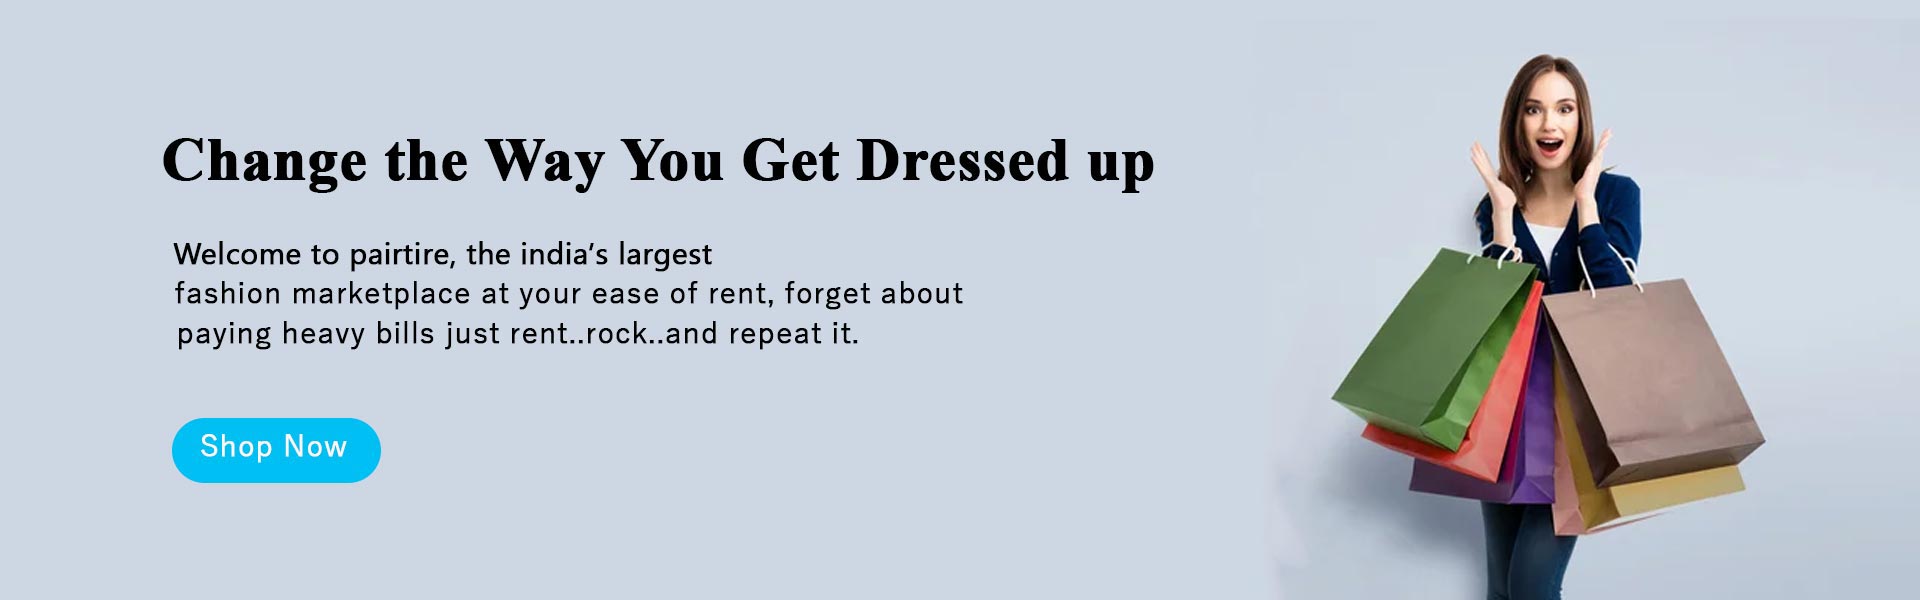 Change the Way You Get Dressed